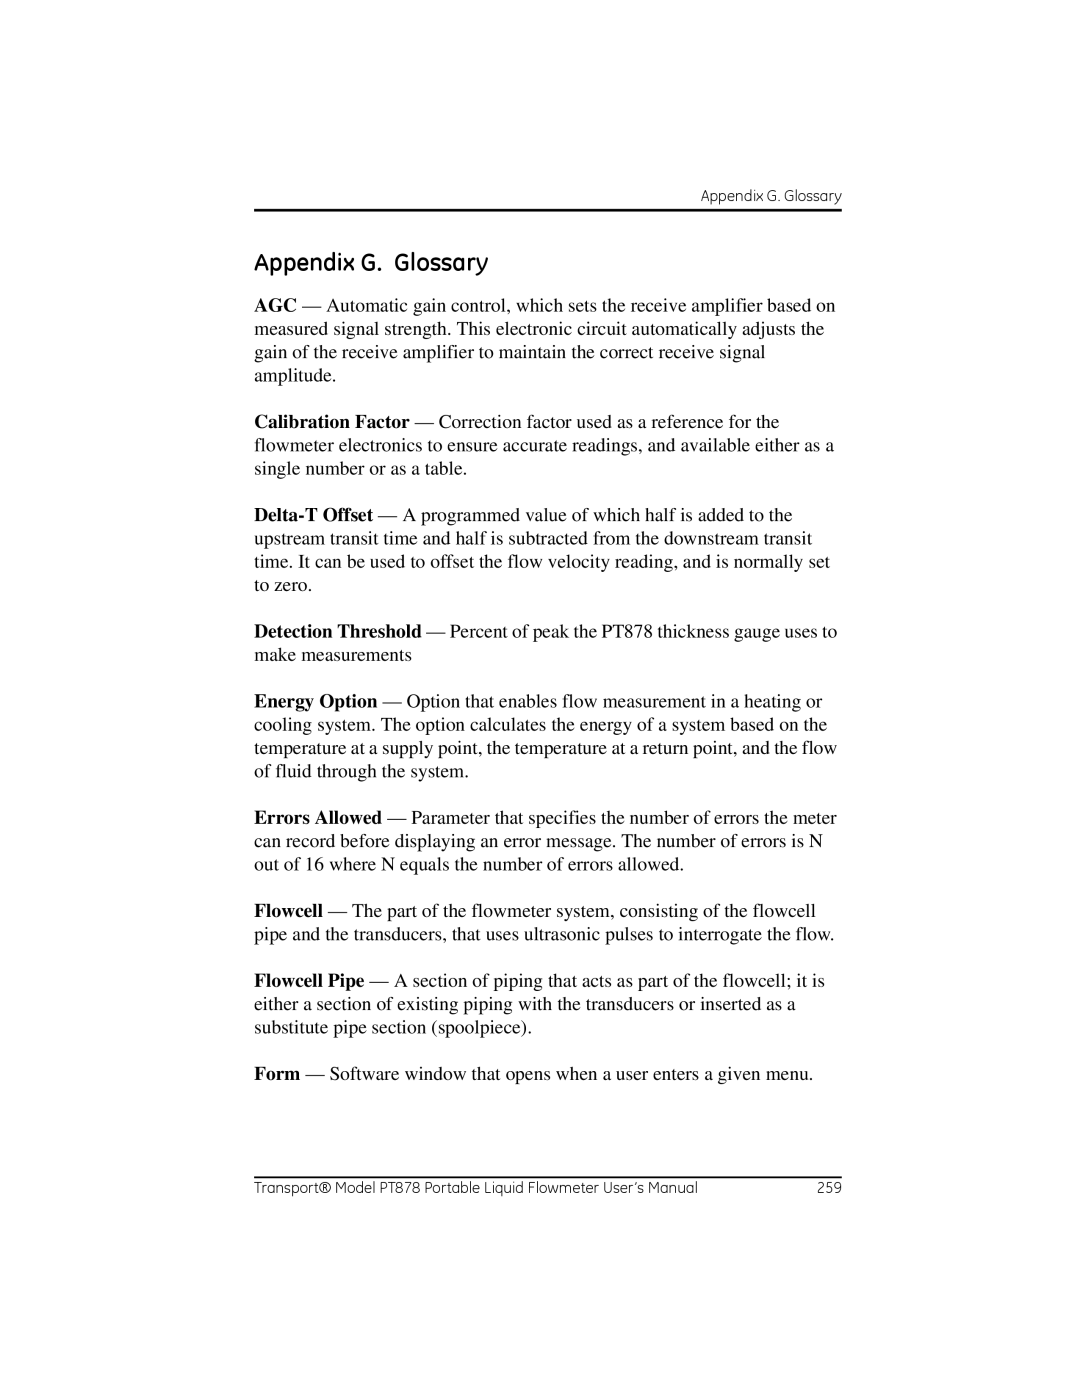 GE PT878 user manual Appendix G. Glossary 